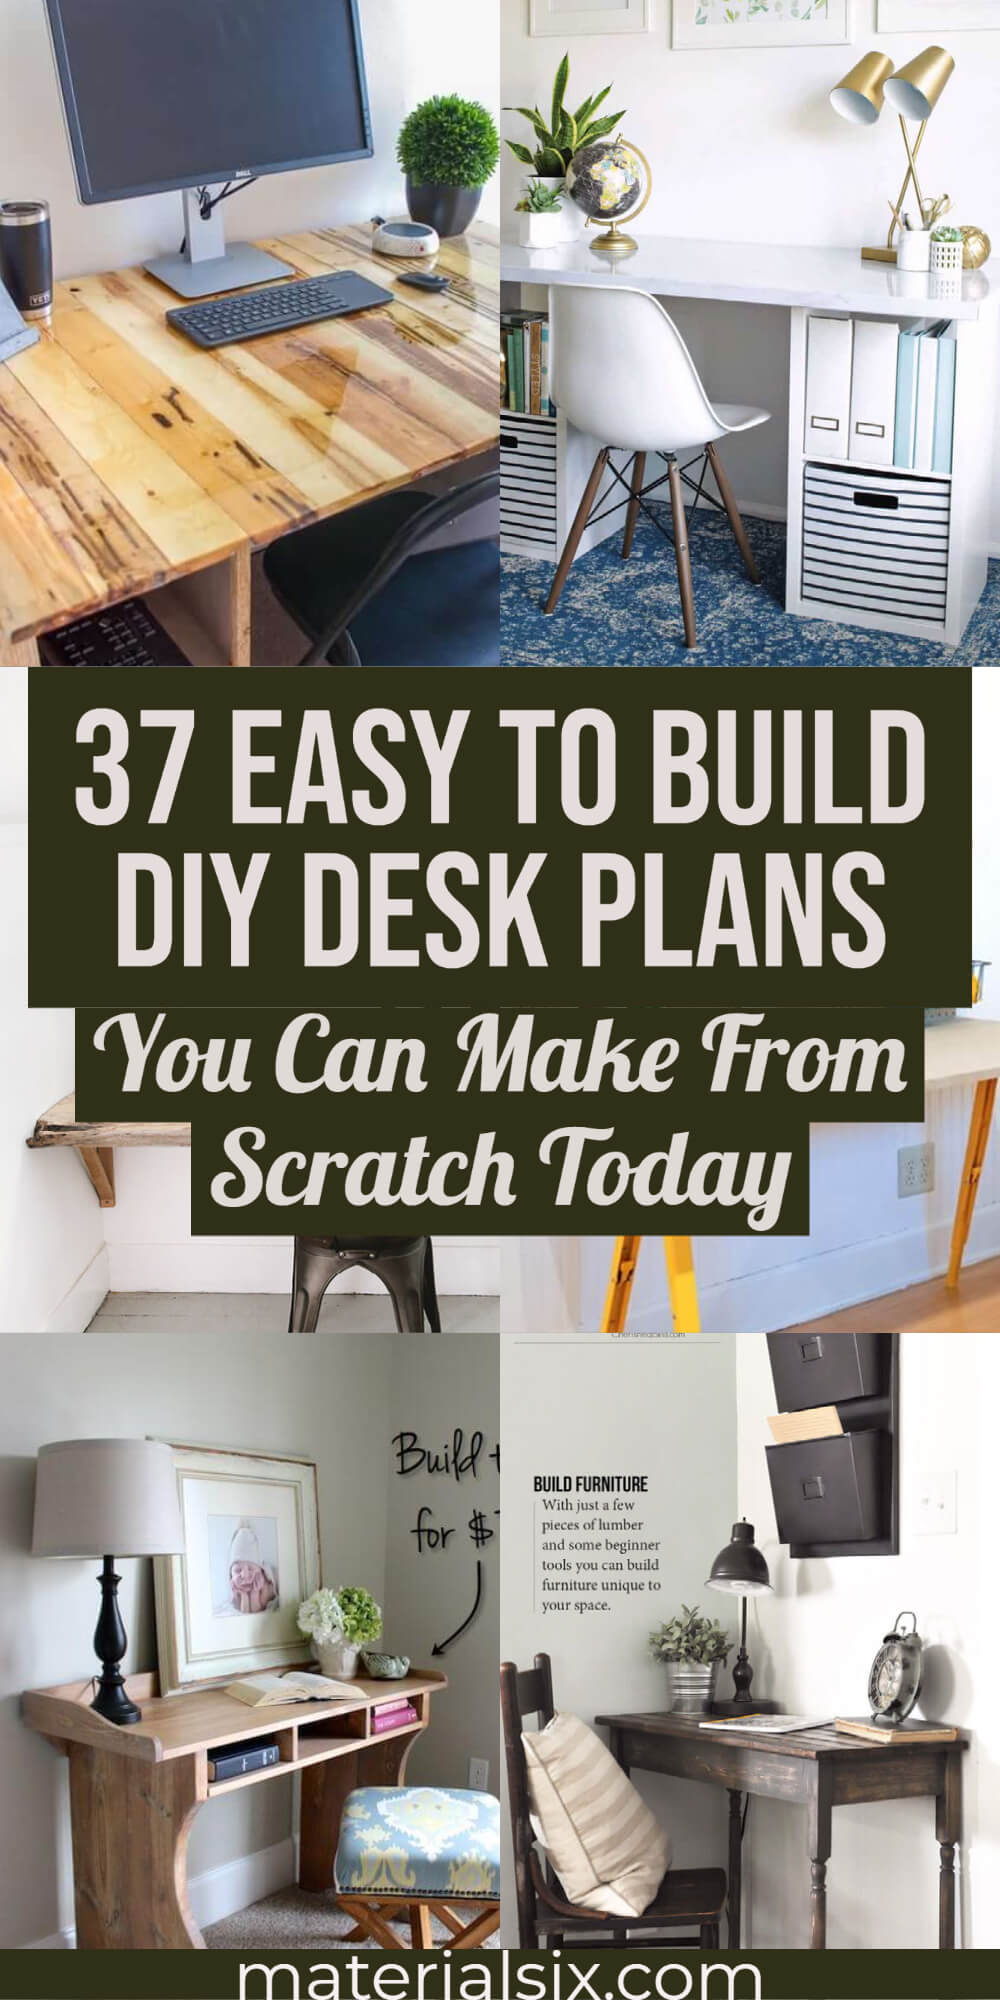 37 Simple DIY Desk Plan Projects You Can Make From Scratch Today